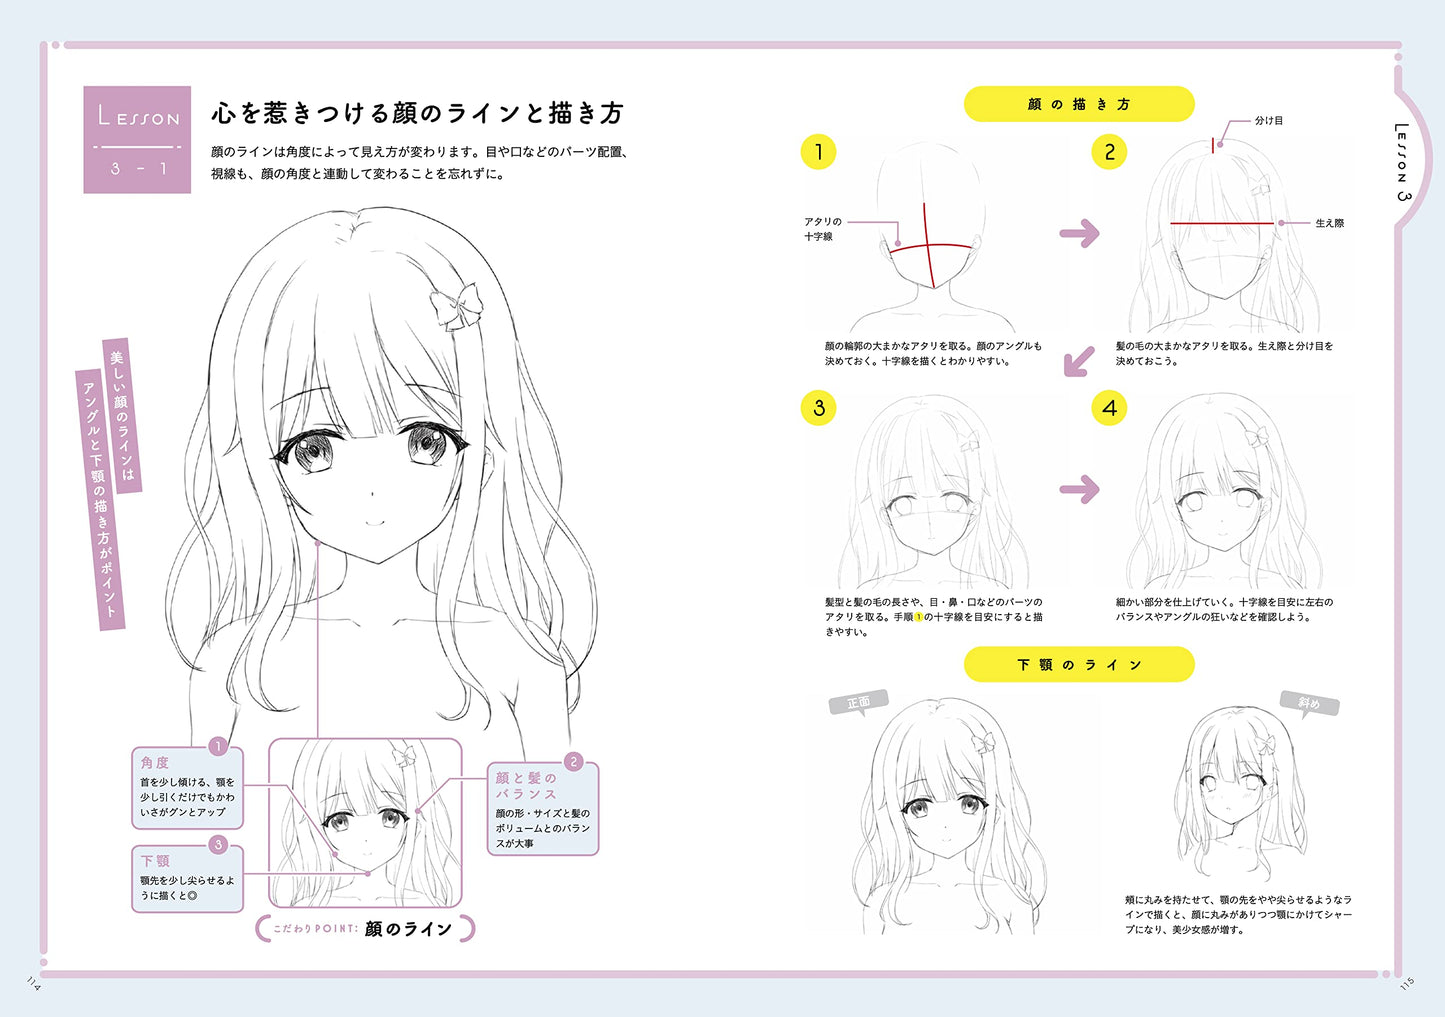 How To Draw Girl Characters Taught by 3 Professional Artists